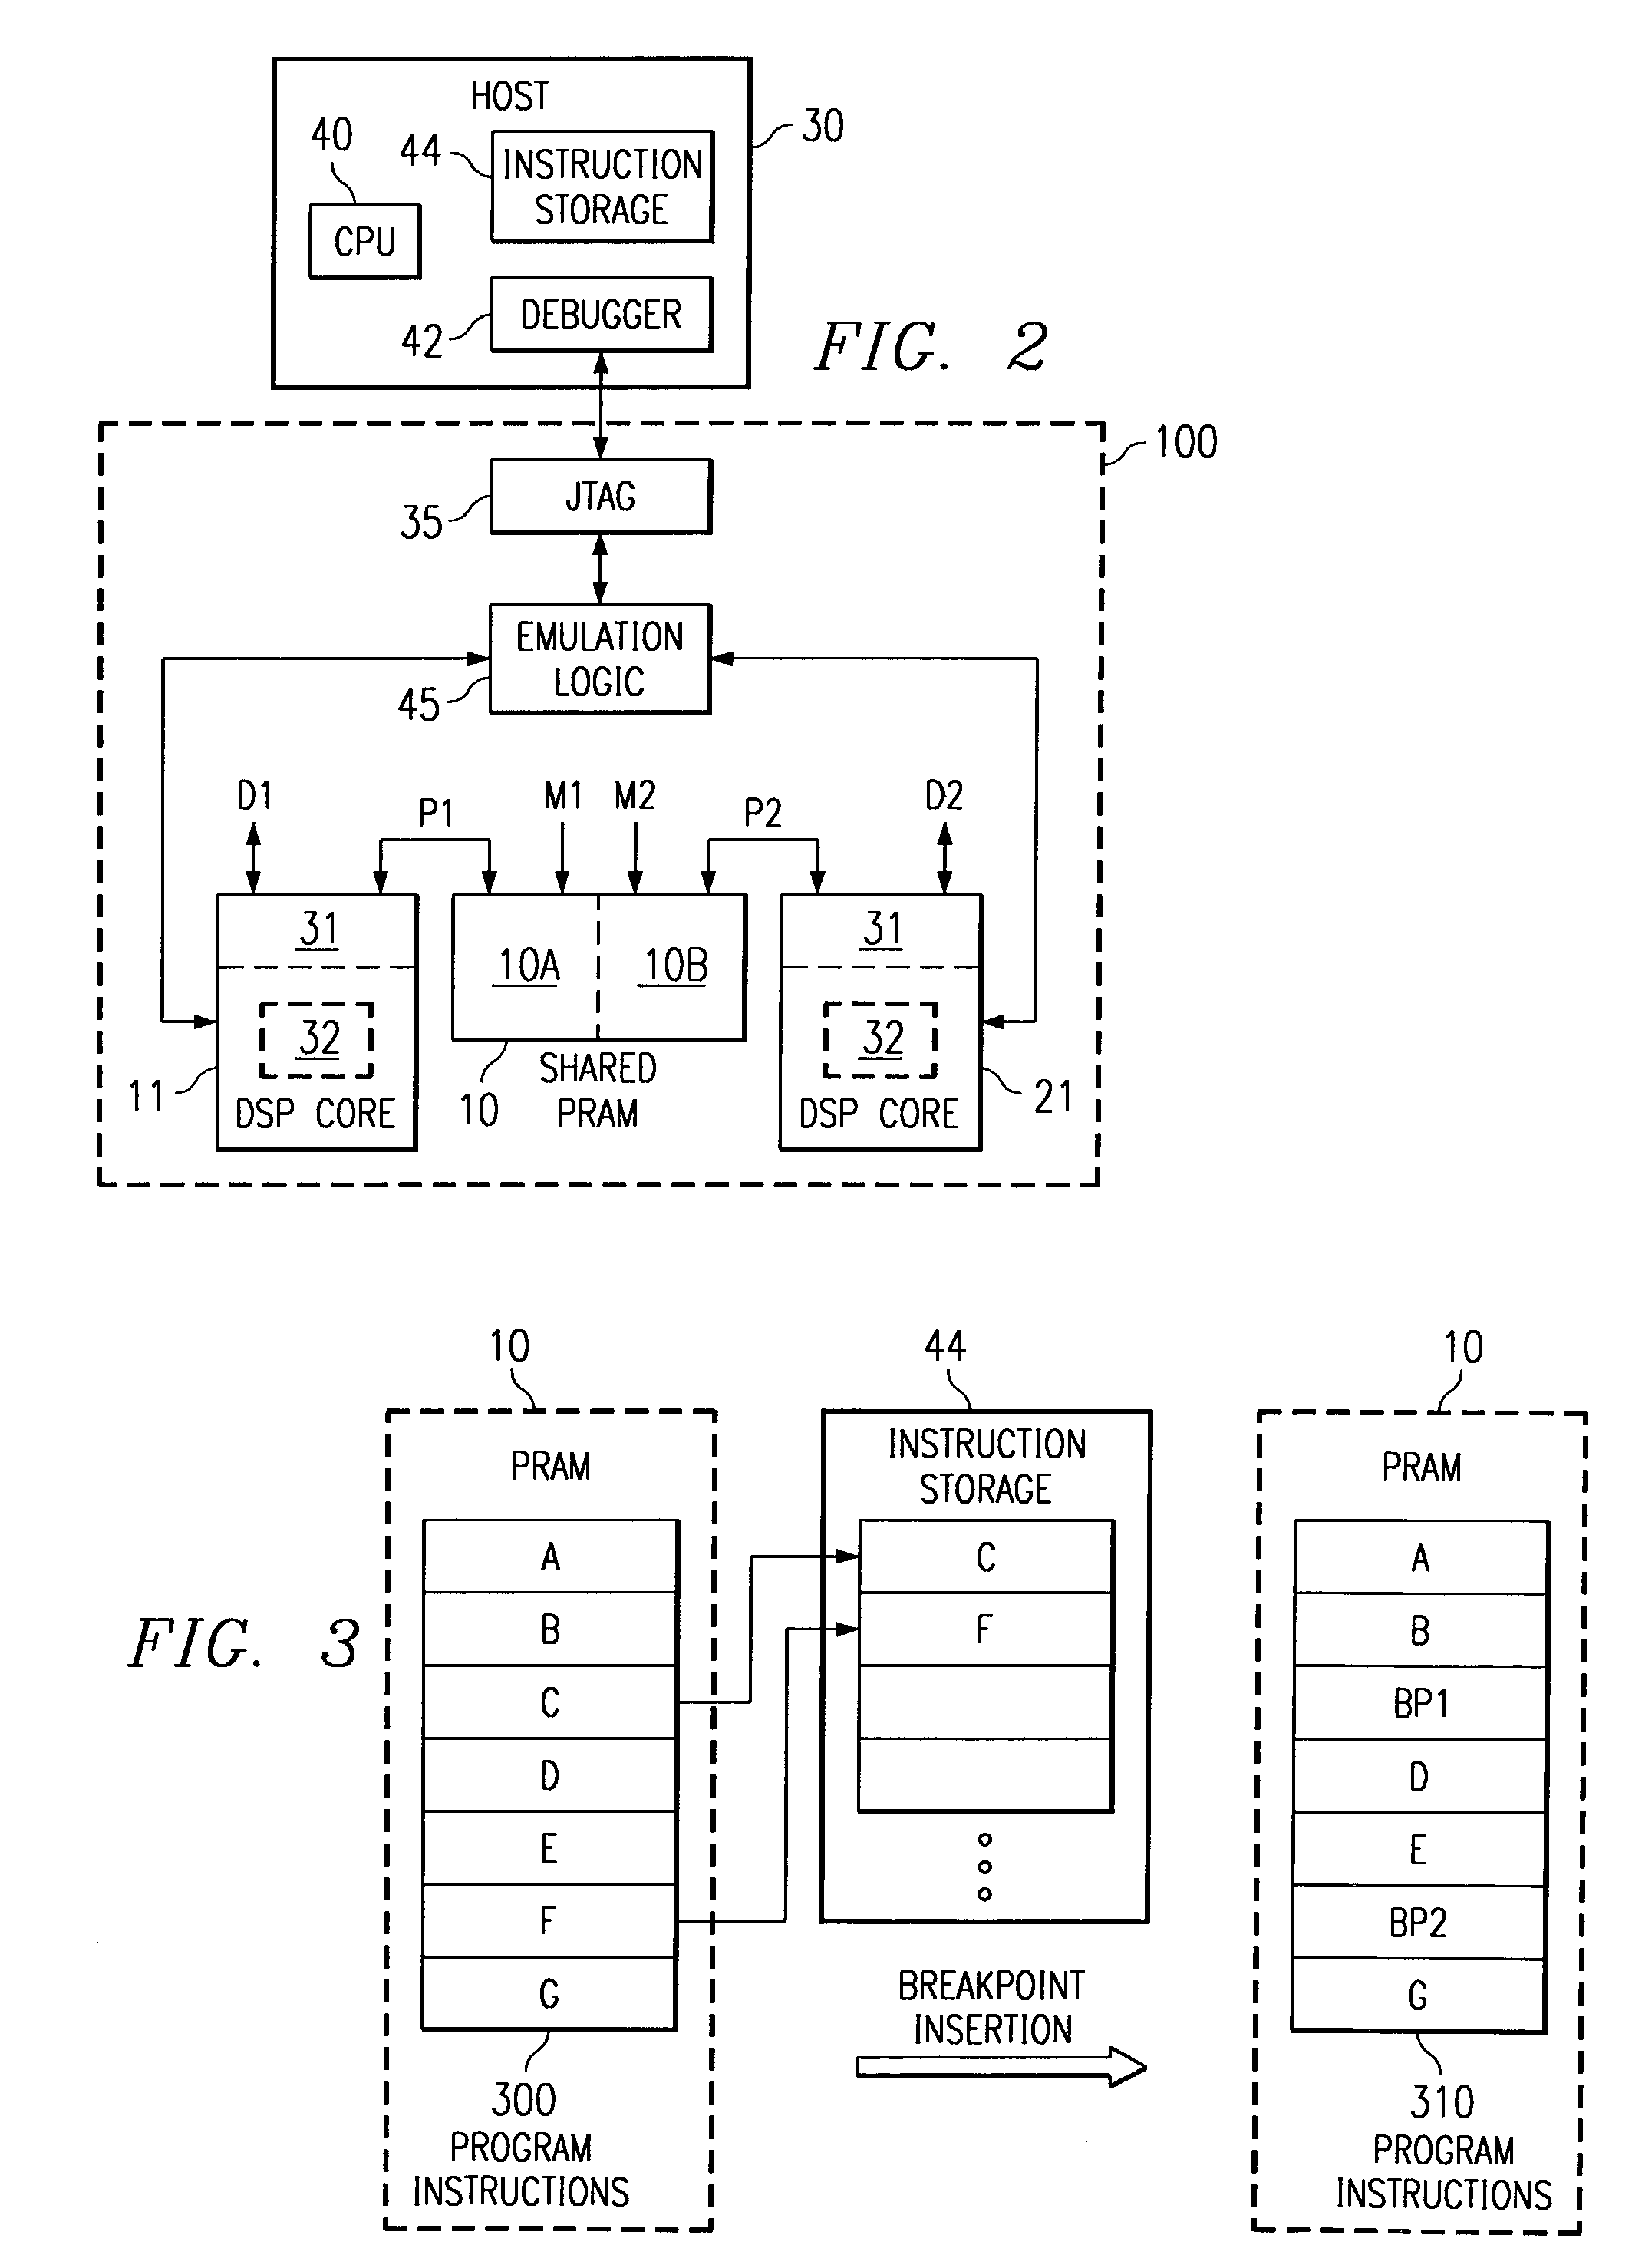 Debugger breakpoint management in a multicore DSP device having shared program memory